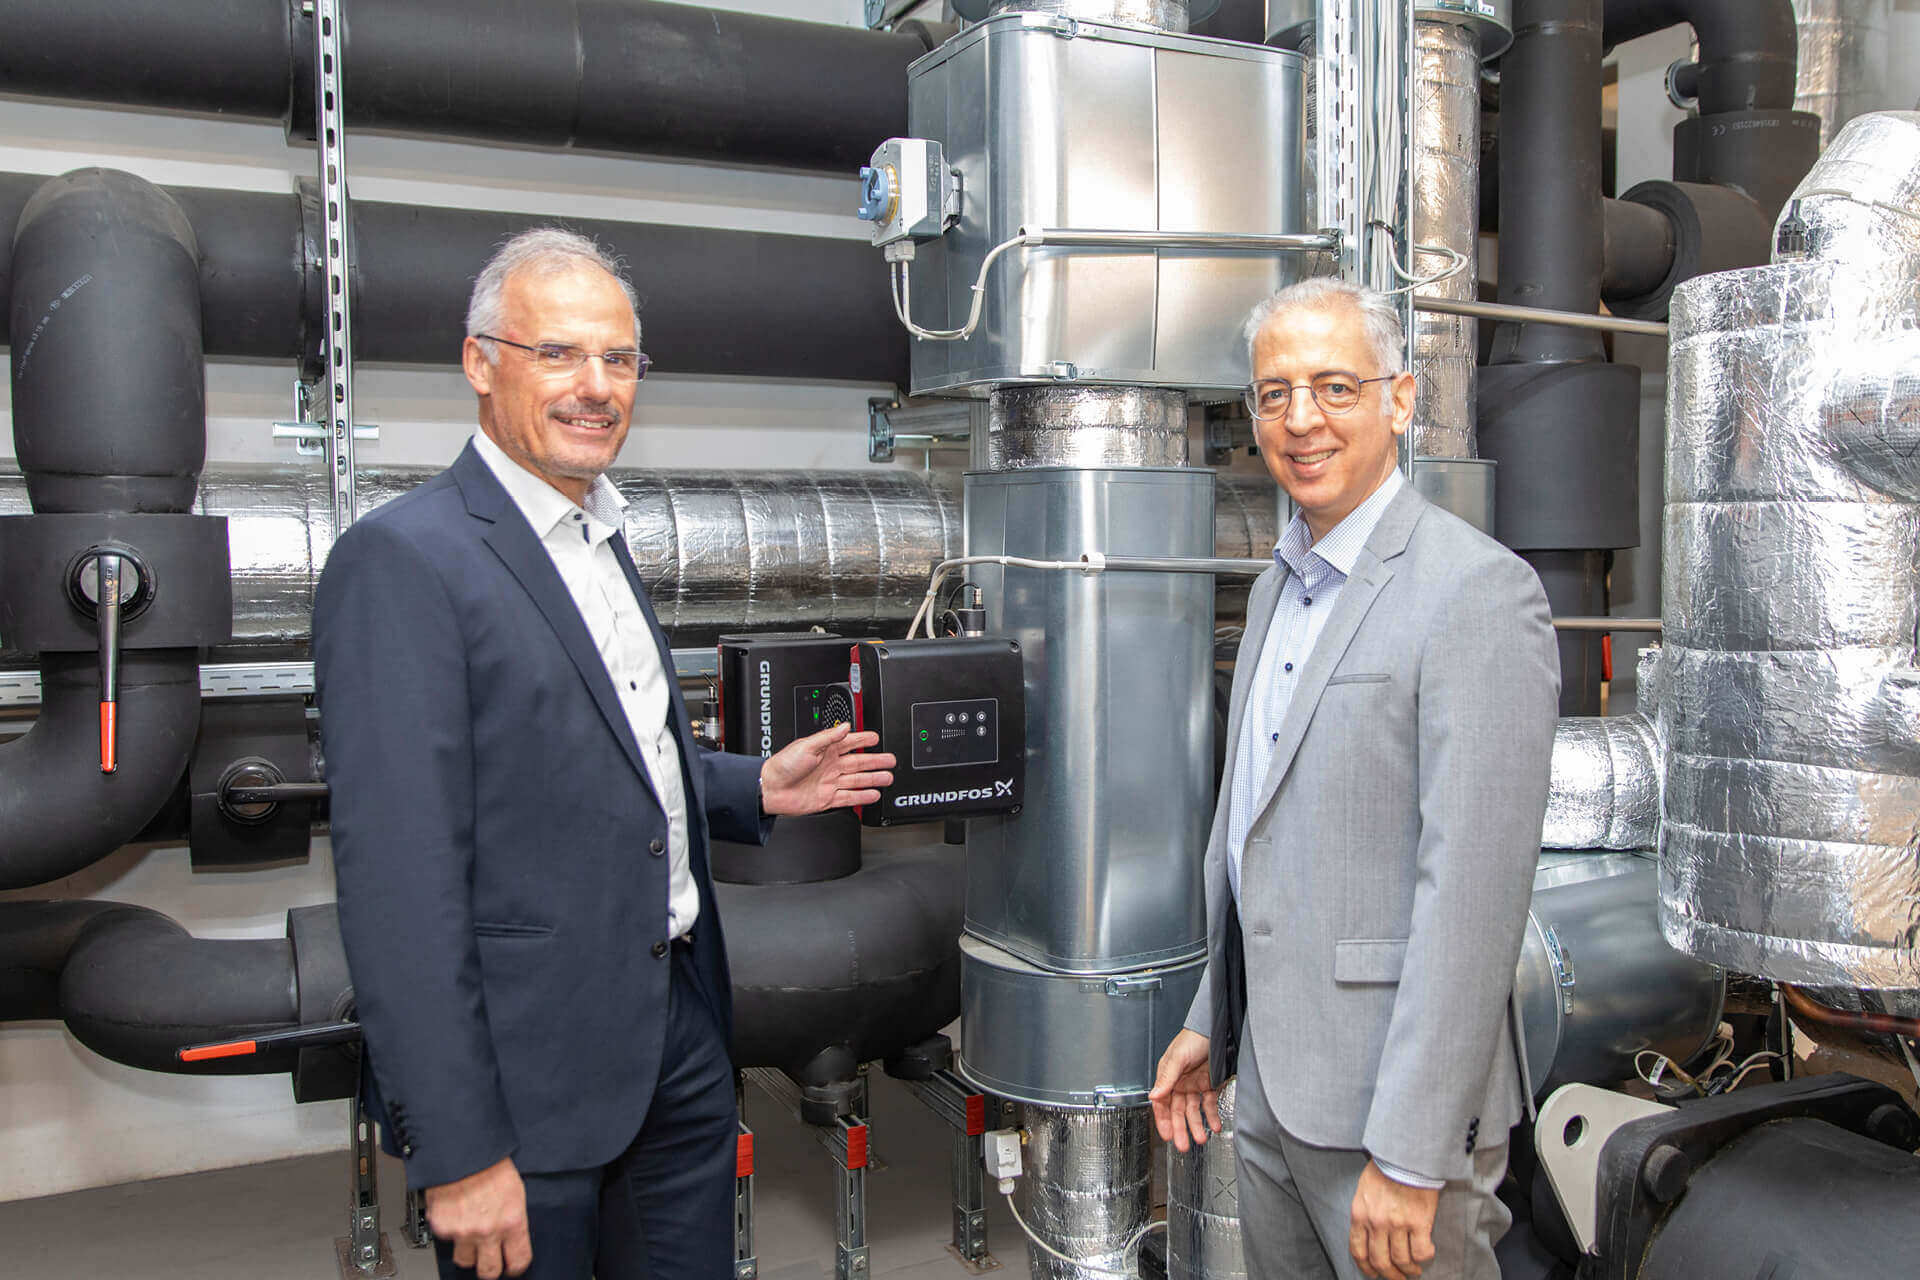 CFO Karl Tschacha (left) and Managing Shareholder Roland Schreiner of Schreiner Group are proud of the newly installed heat pumps. The principal of the pump house construction project was Schreiner Immobilien 1 GmbH & Co. KG. Hence the heat pump project was successfully executed under the responsibility of its CEO, Prof. h.c. mult. Dr. h.c. Ing. Helmut Schreiner.